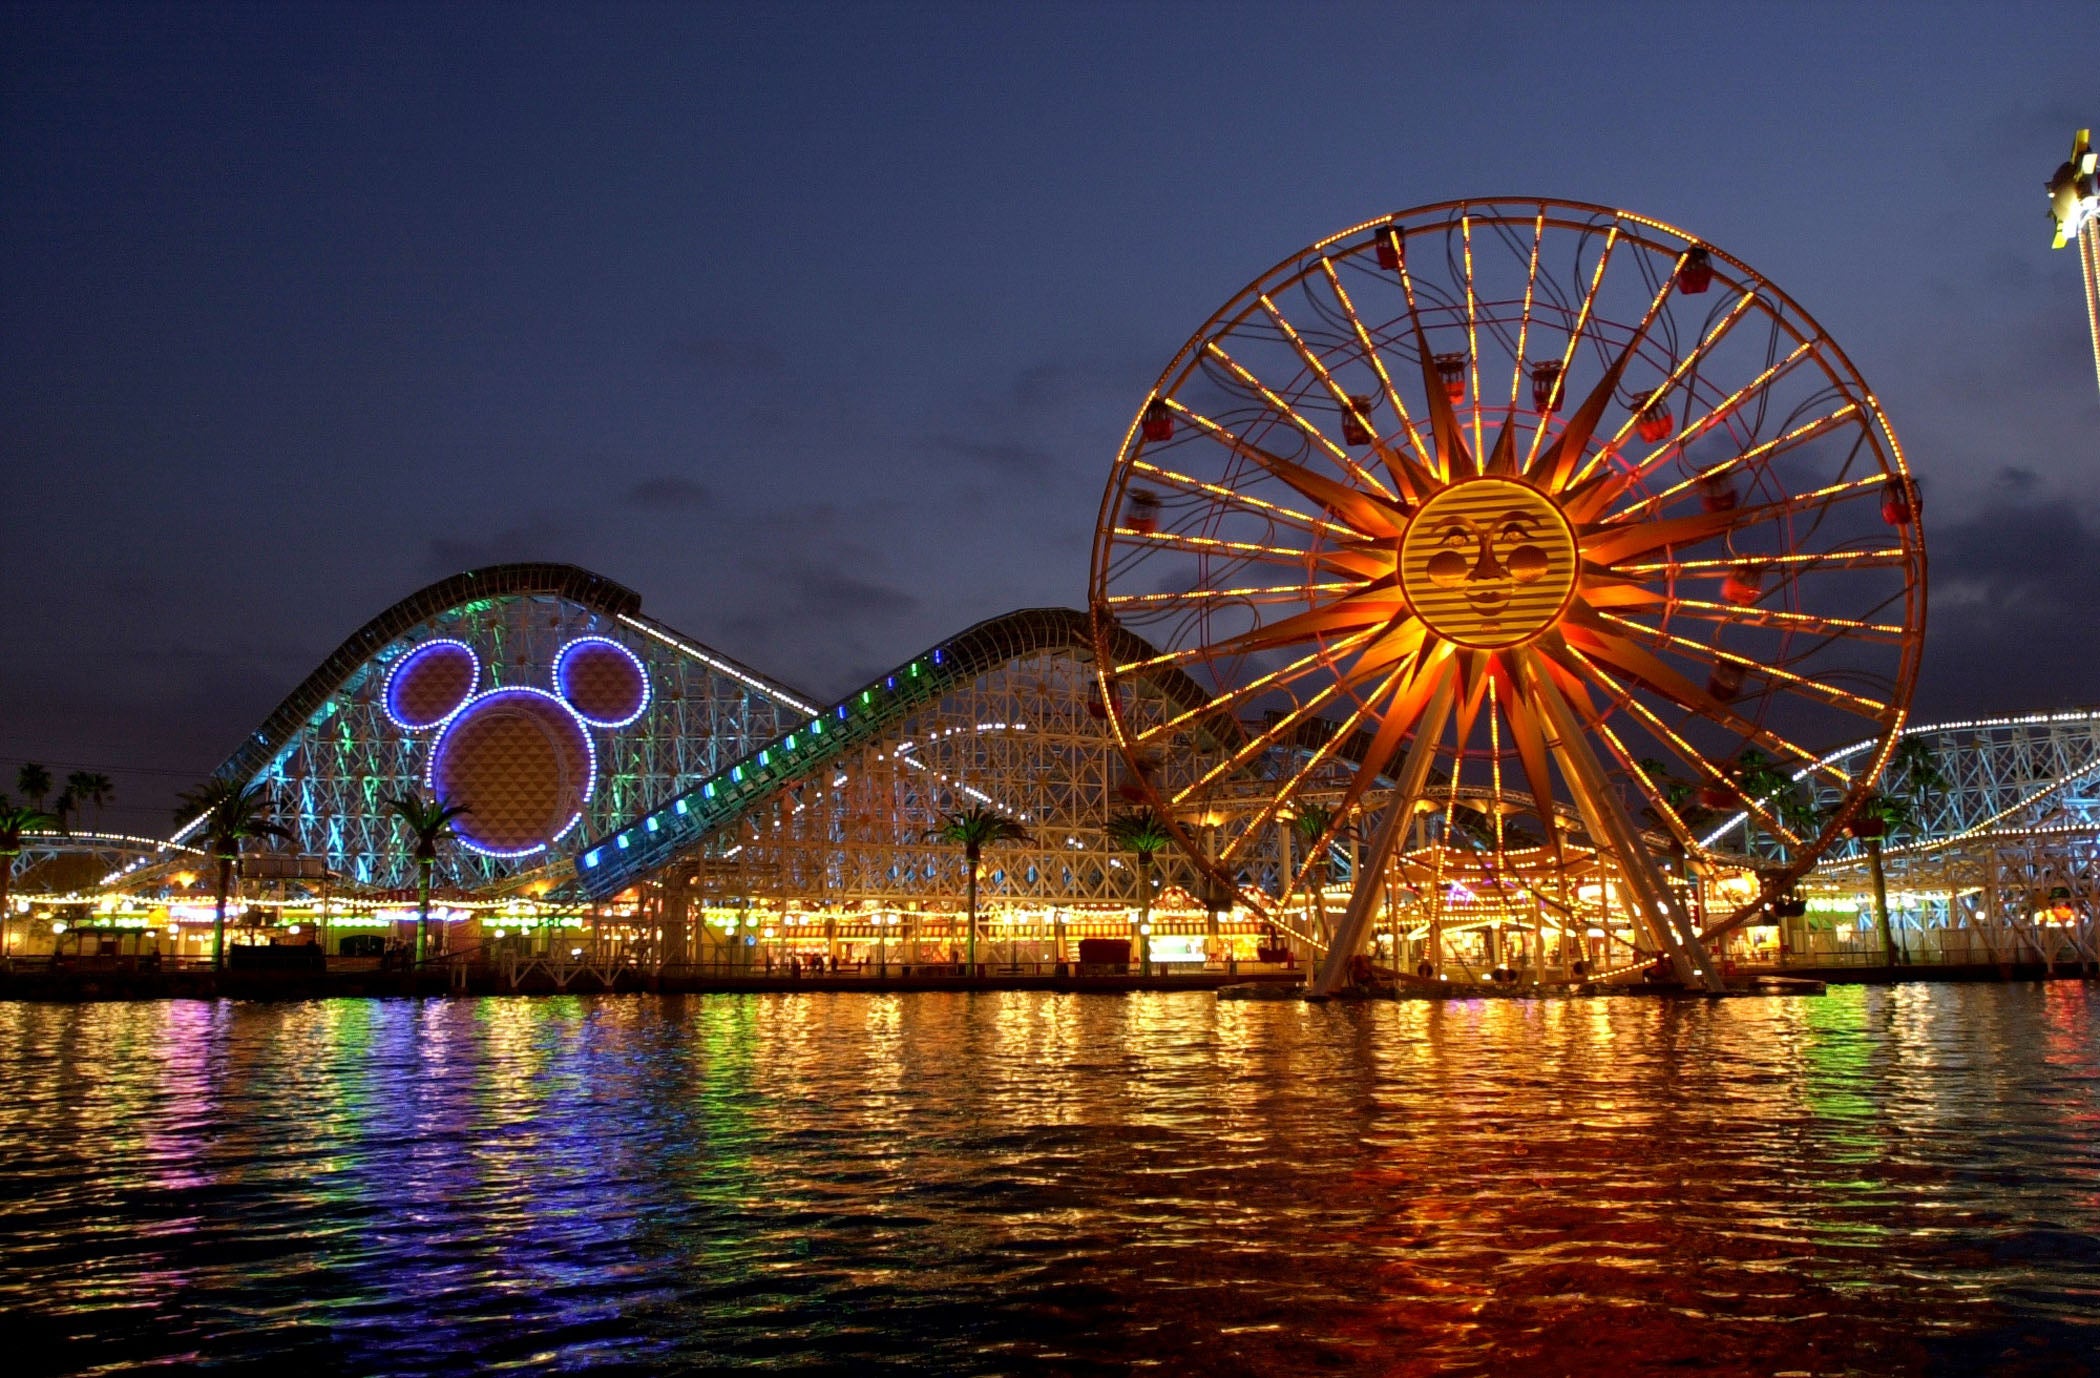 Get discounted entry to theme parks including Disneyland with a combined pass